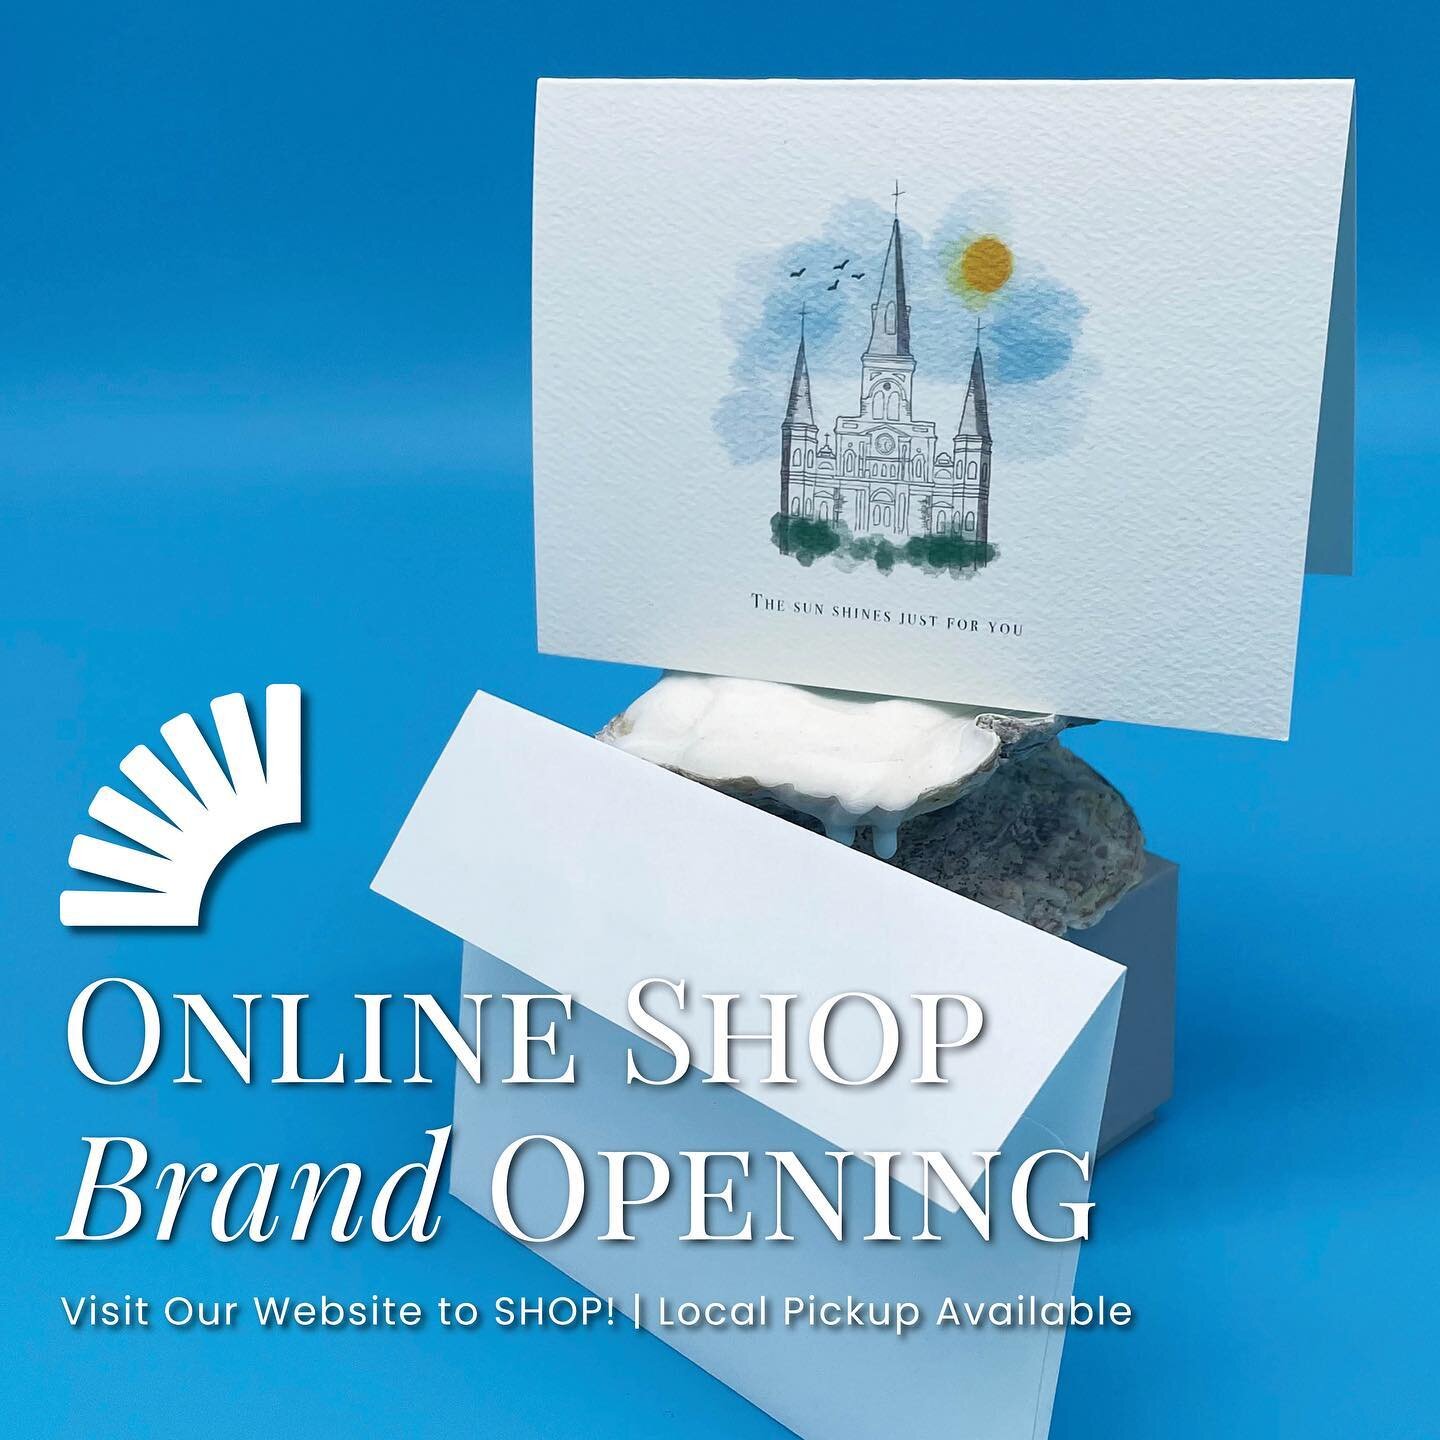 The moment we&rsquo;ve all been waiting for&hellip;Our online store is finally OPEN &amp; ready to go 🎉 What a great way to start the week, right?! Visit our website to shop. Shipping AND local pickup available! 
.
.
.
.
.
.
#neworleans #stationery 